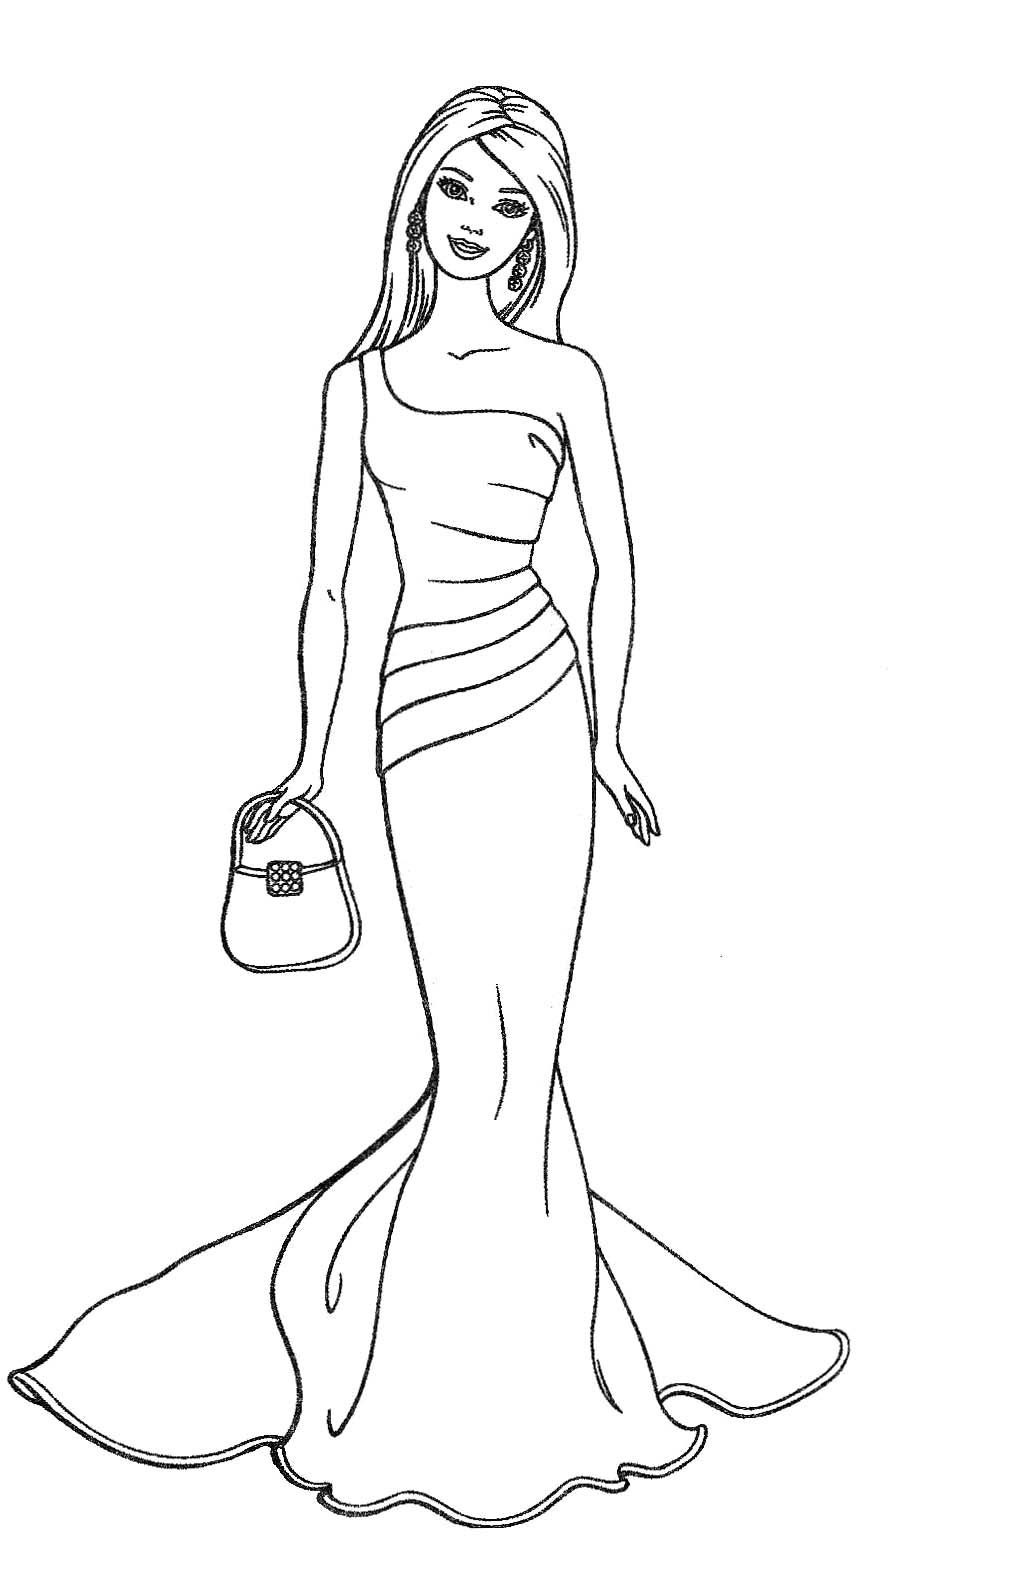 Barbie Coloring Sheets For Kids
 Barbie Coloring Pages Printable To Download